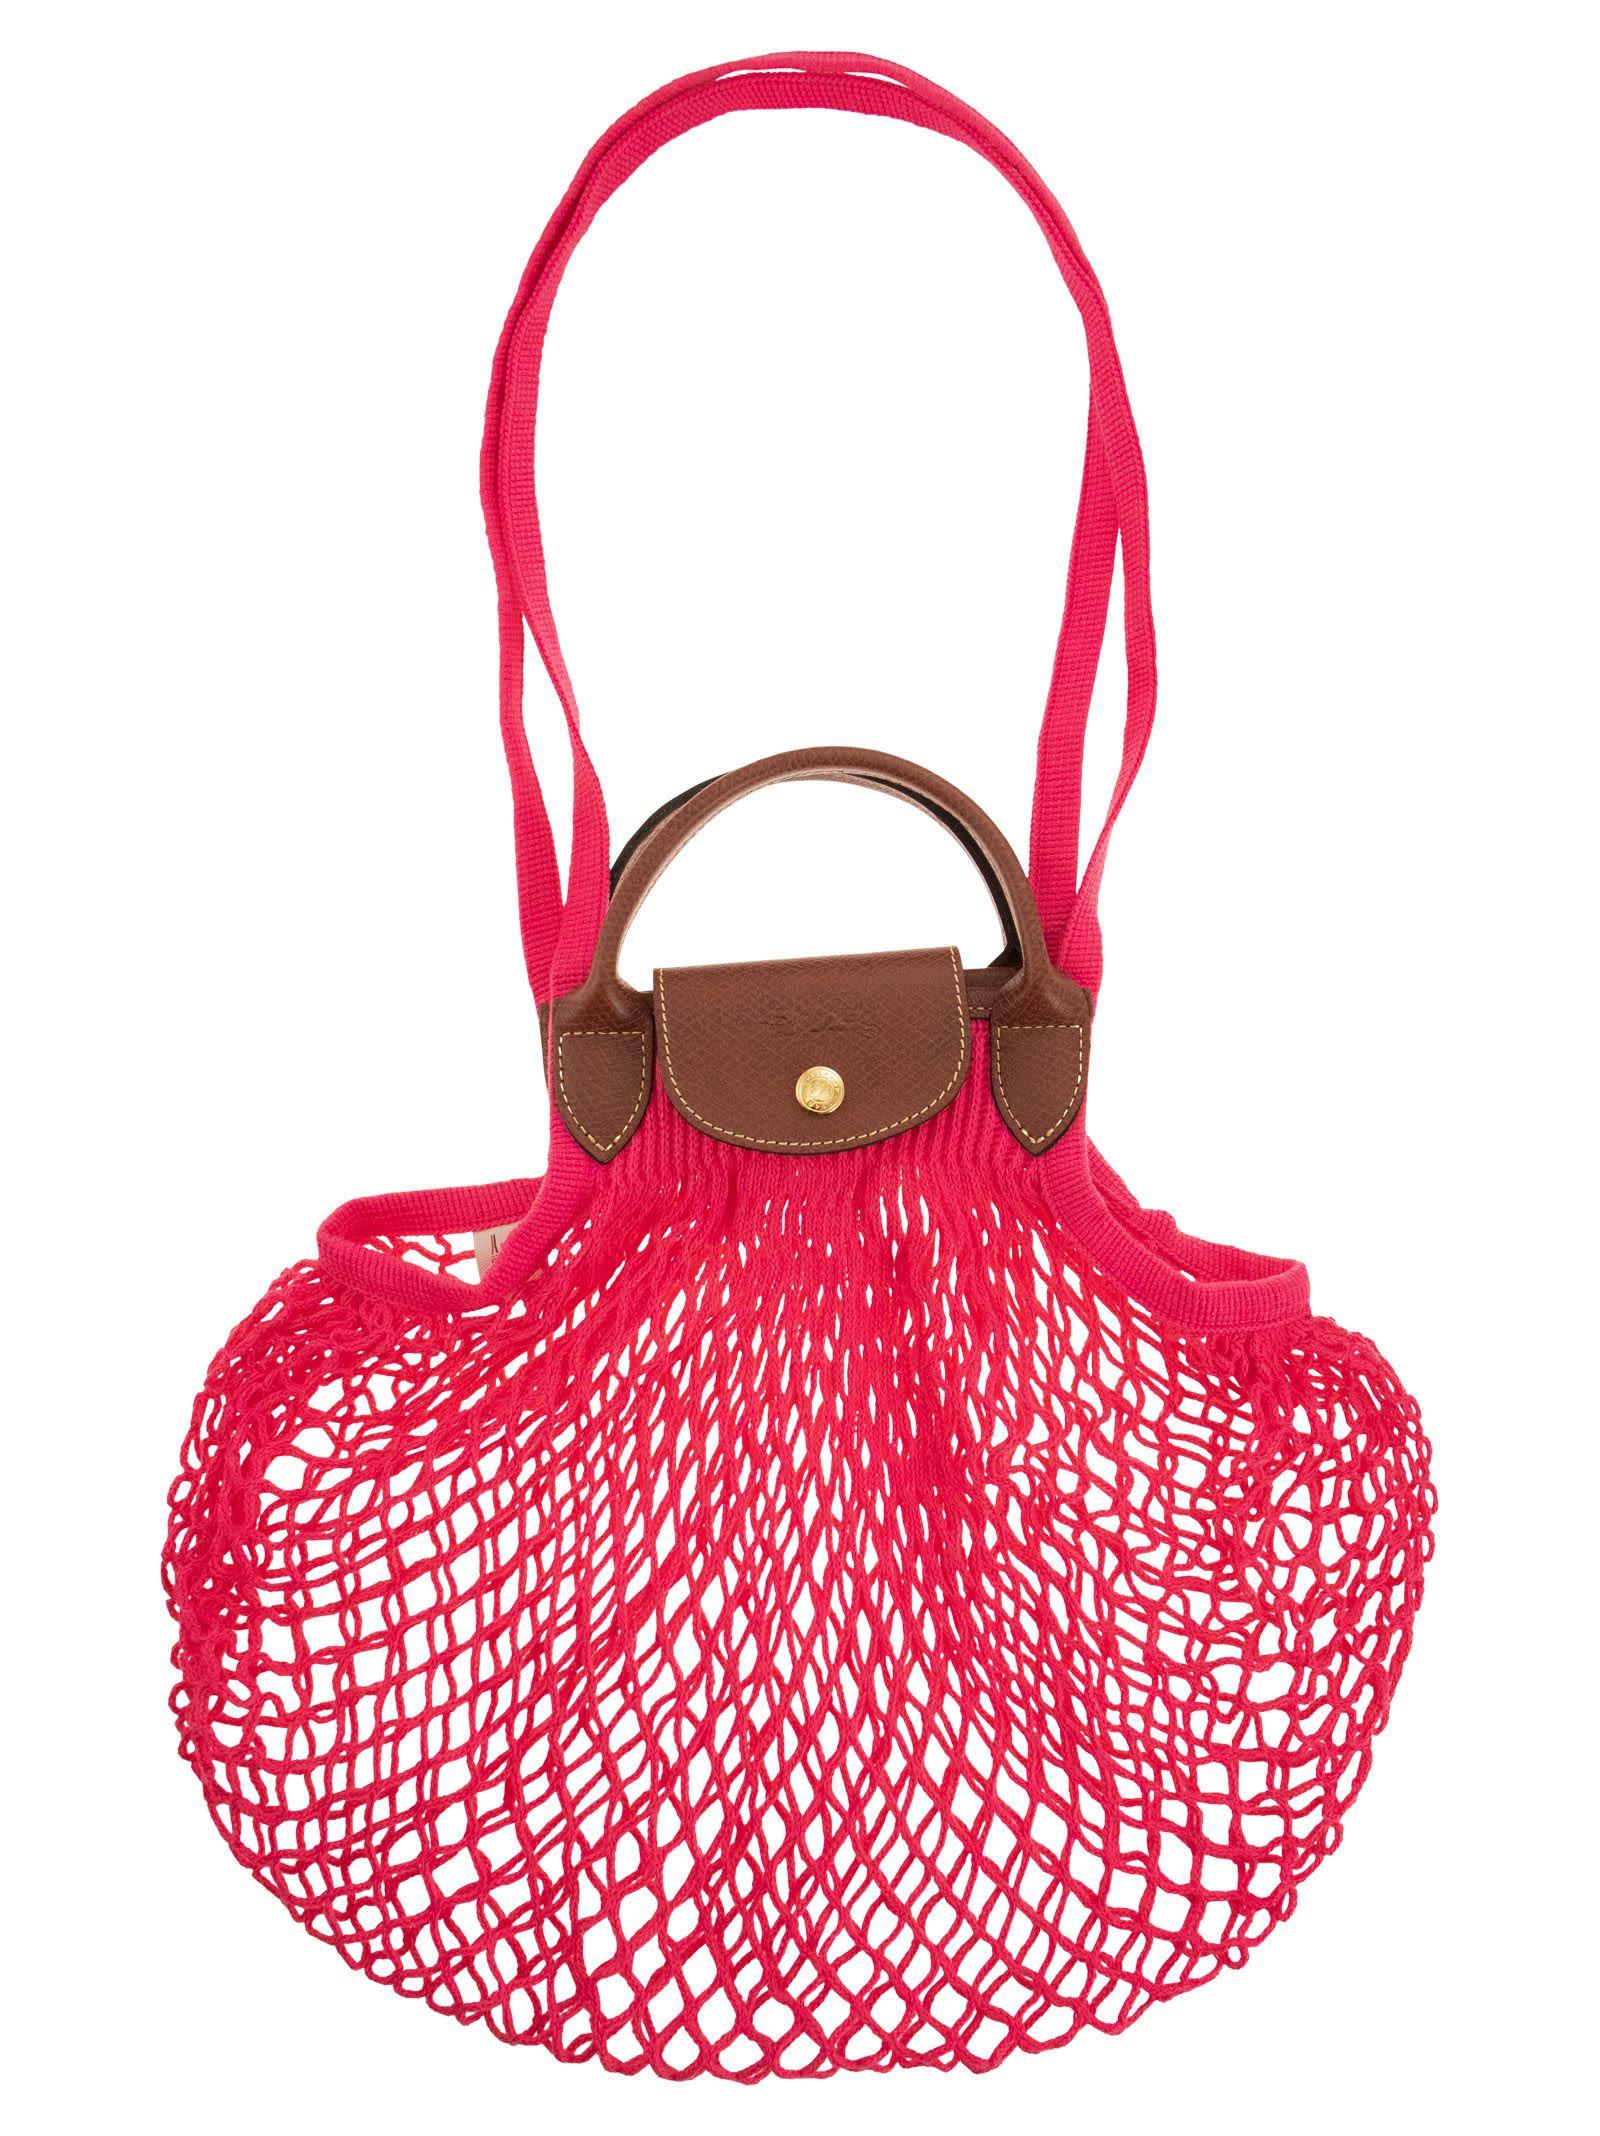 Longchamp Le Pliage Filet - Top Handle Bag in Red